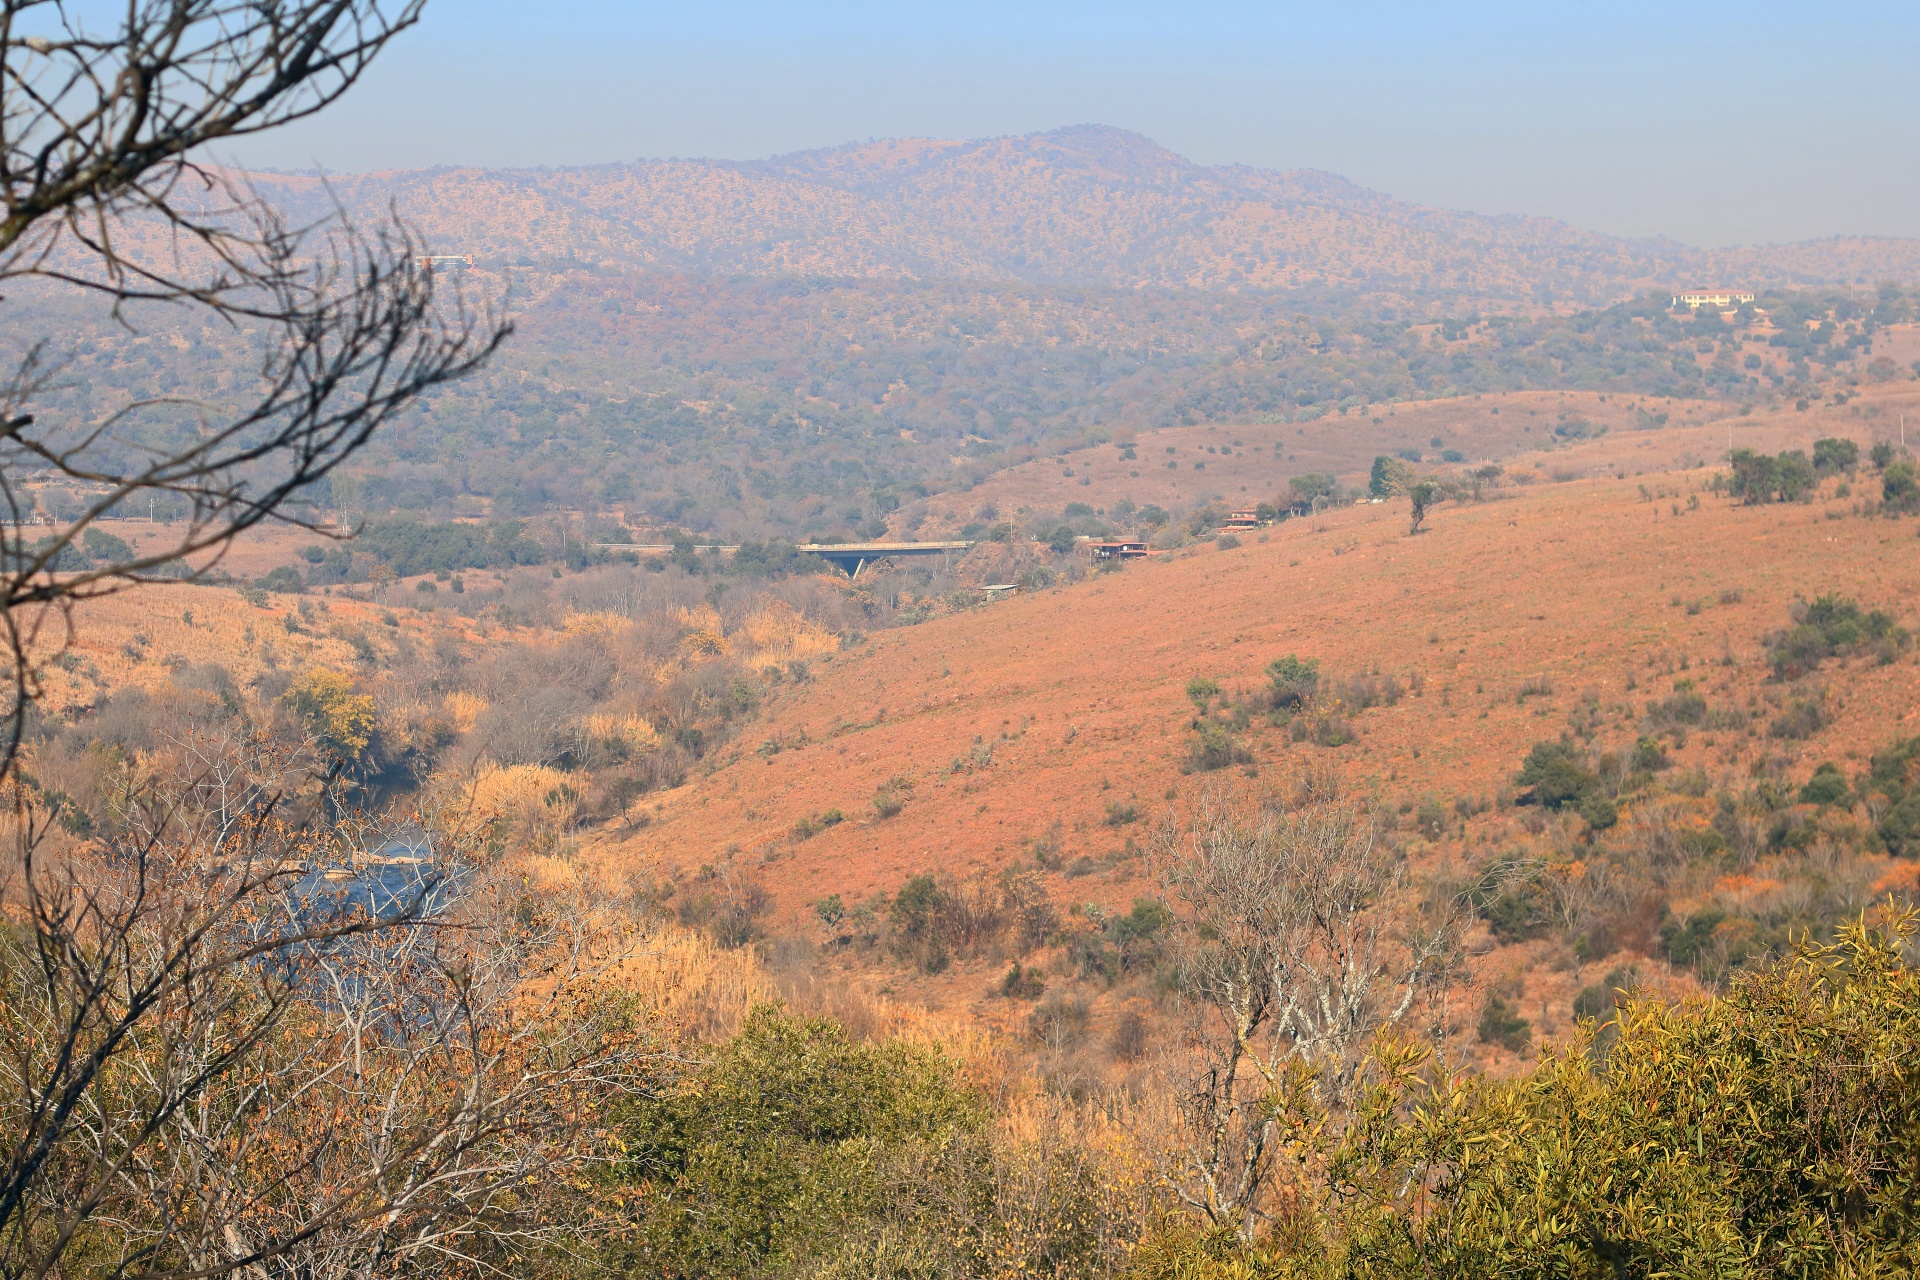 view over hills and slopes in a south african winter landscape with dry grassland and other vegetation